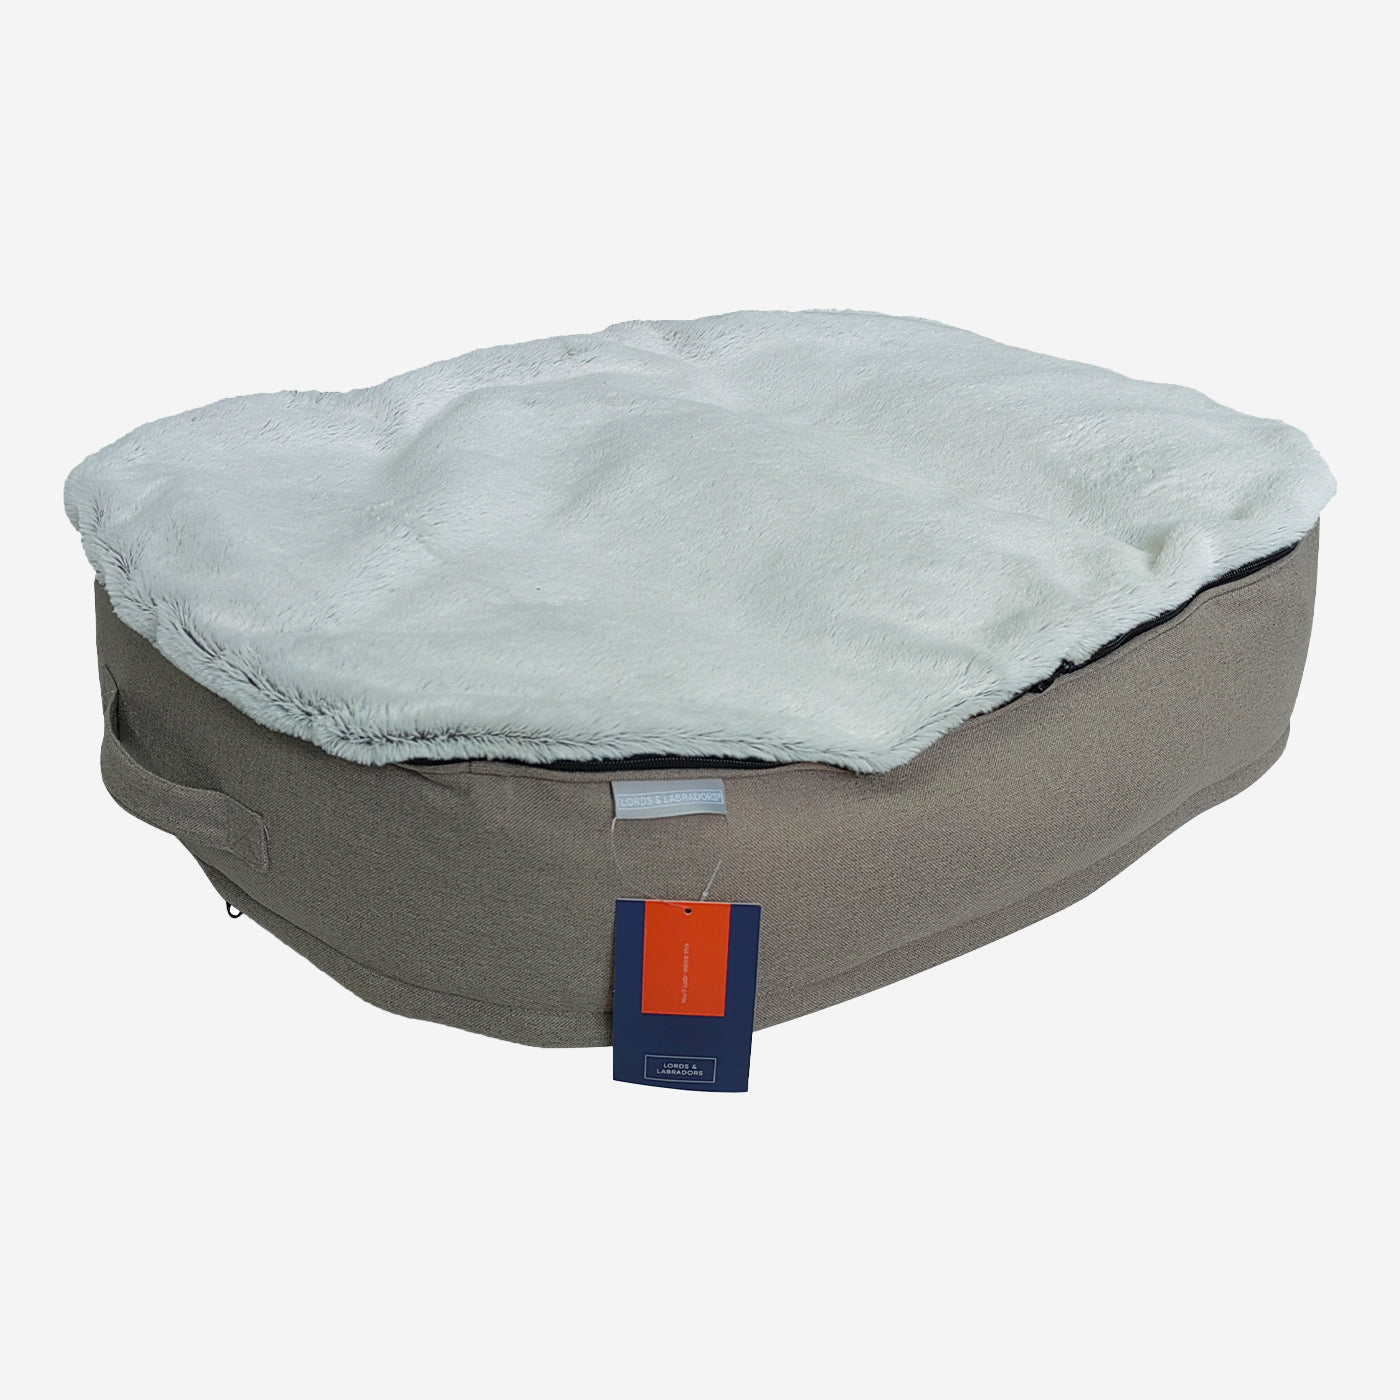 Present Your Furry Friend with the Perfect Dog Bed for The Ultimate Pet Nap-Time! Discover Our Luxury Dig & Dive Dog Bed! Available Now at Lords & Labradors US